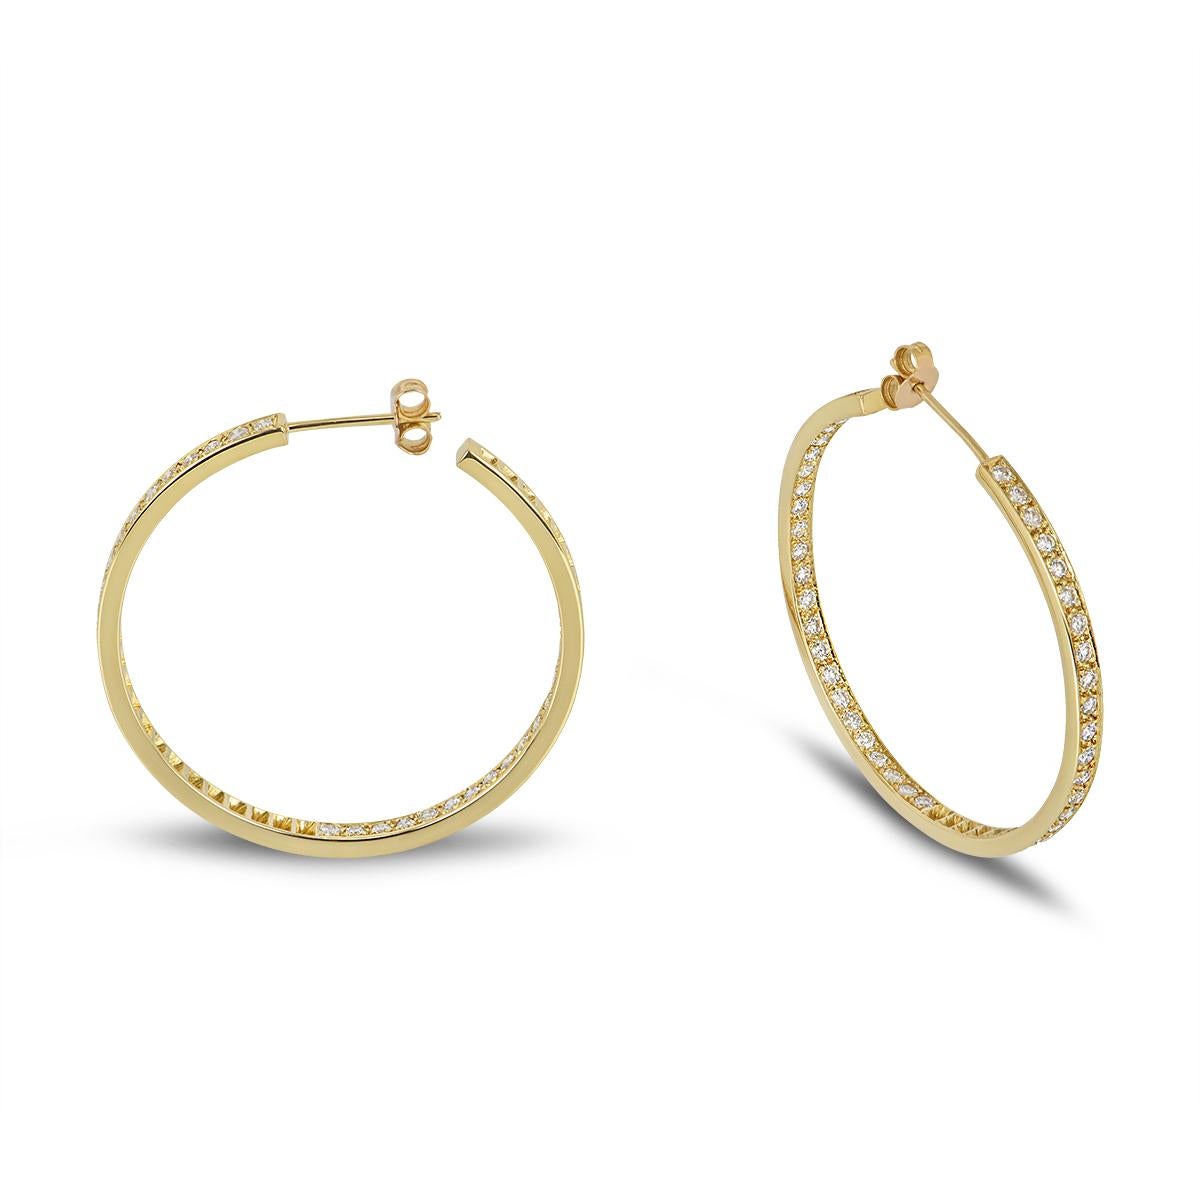 A beautiful pair of 18k yellow gold diamond hoop earrings. The earrings are each set to the front and inner side with 47 round brilliant cut diamonds for a combined total of 2.35ct, H-I colour and VS+ clarity. The earrings measure 2.8mm wide, 4cm in